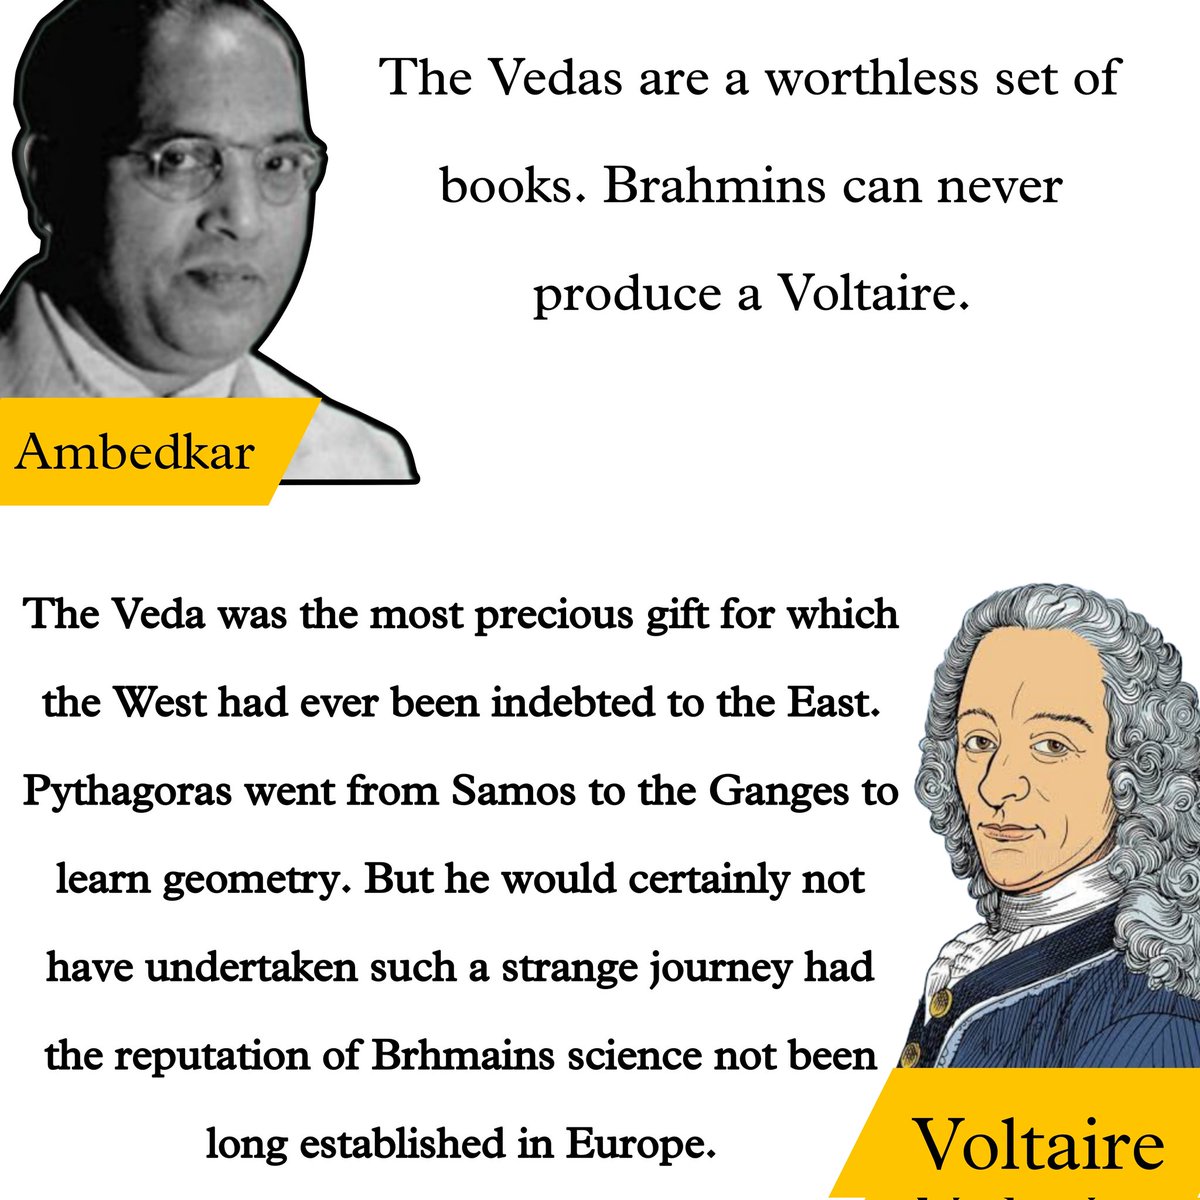 Ambedkar on Veds and Voltaire, meanwhile Voltaire on Veds.